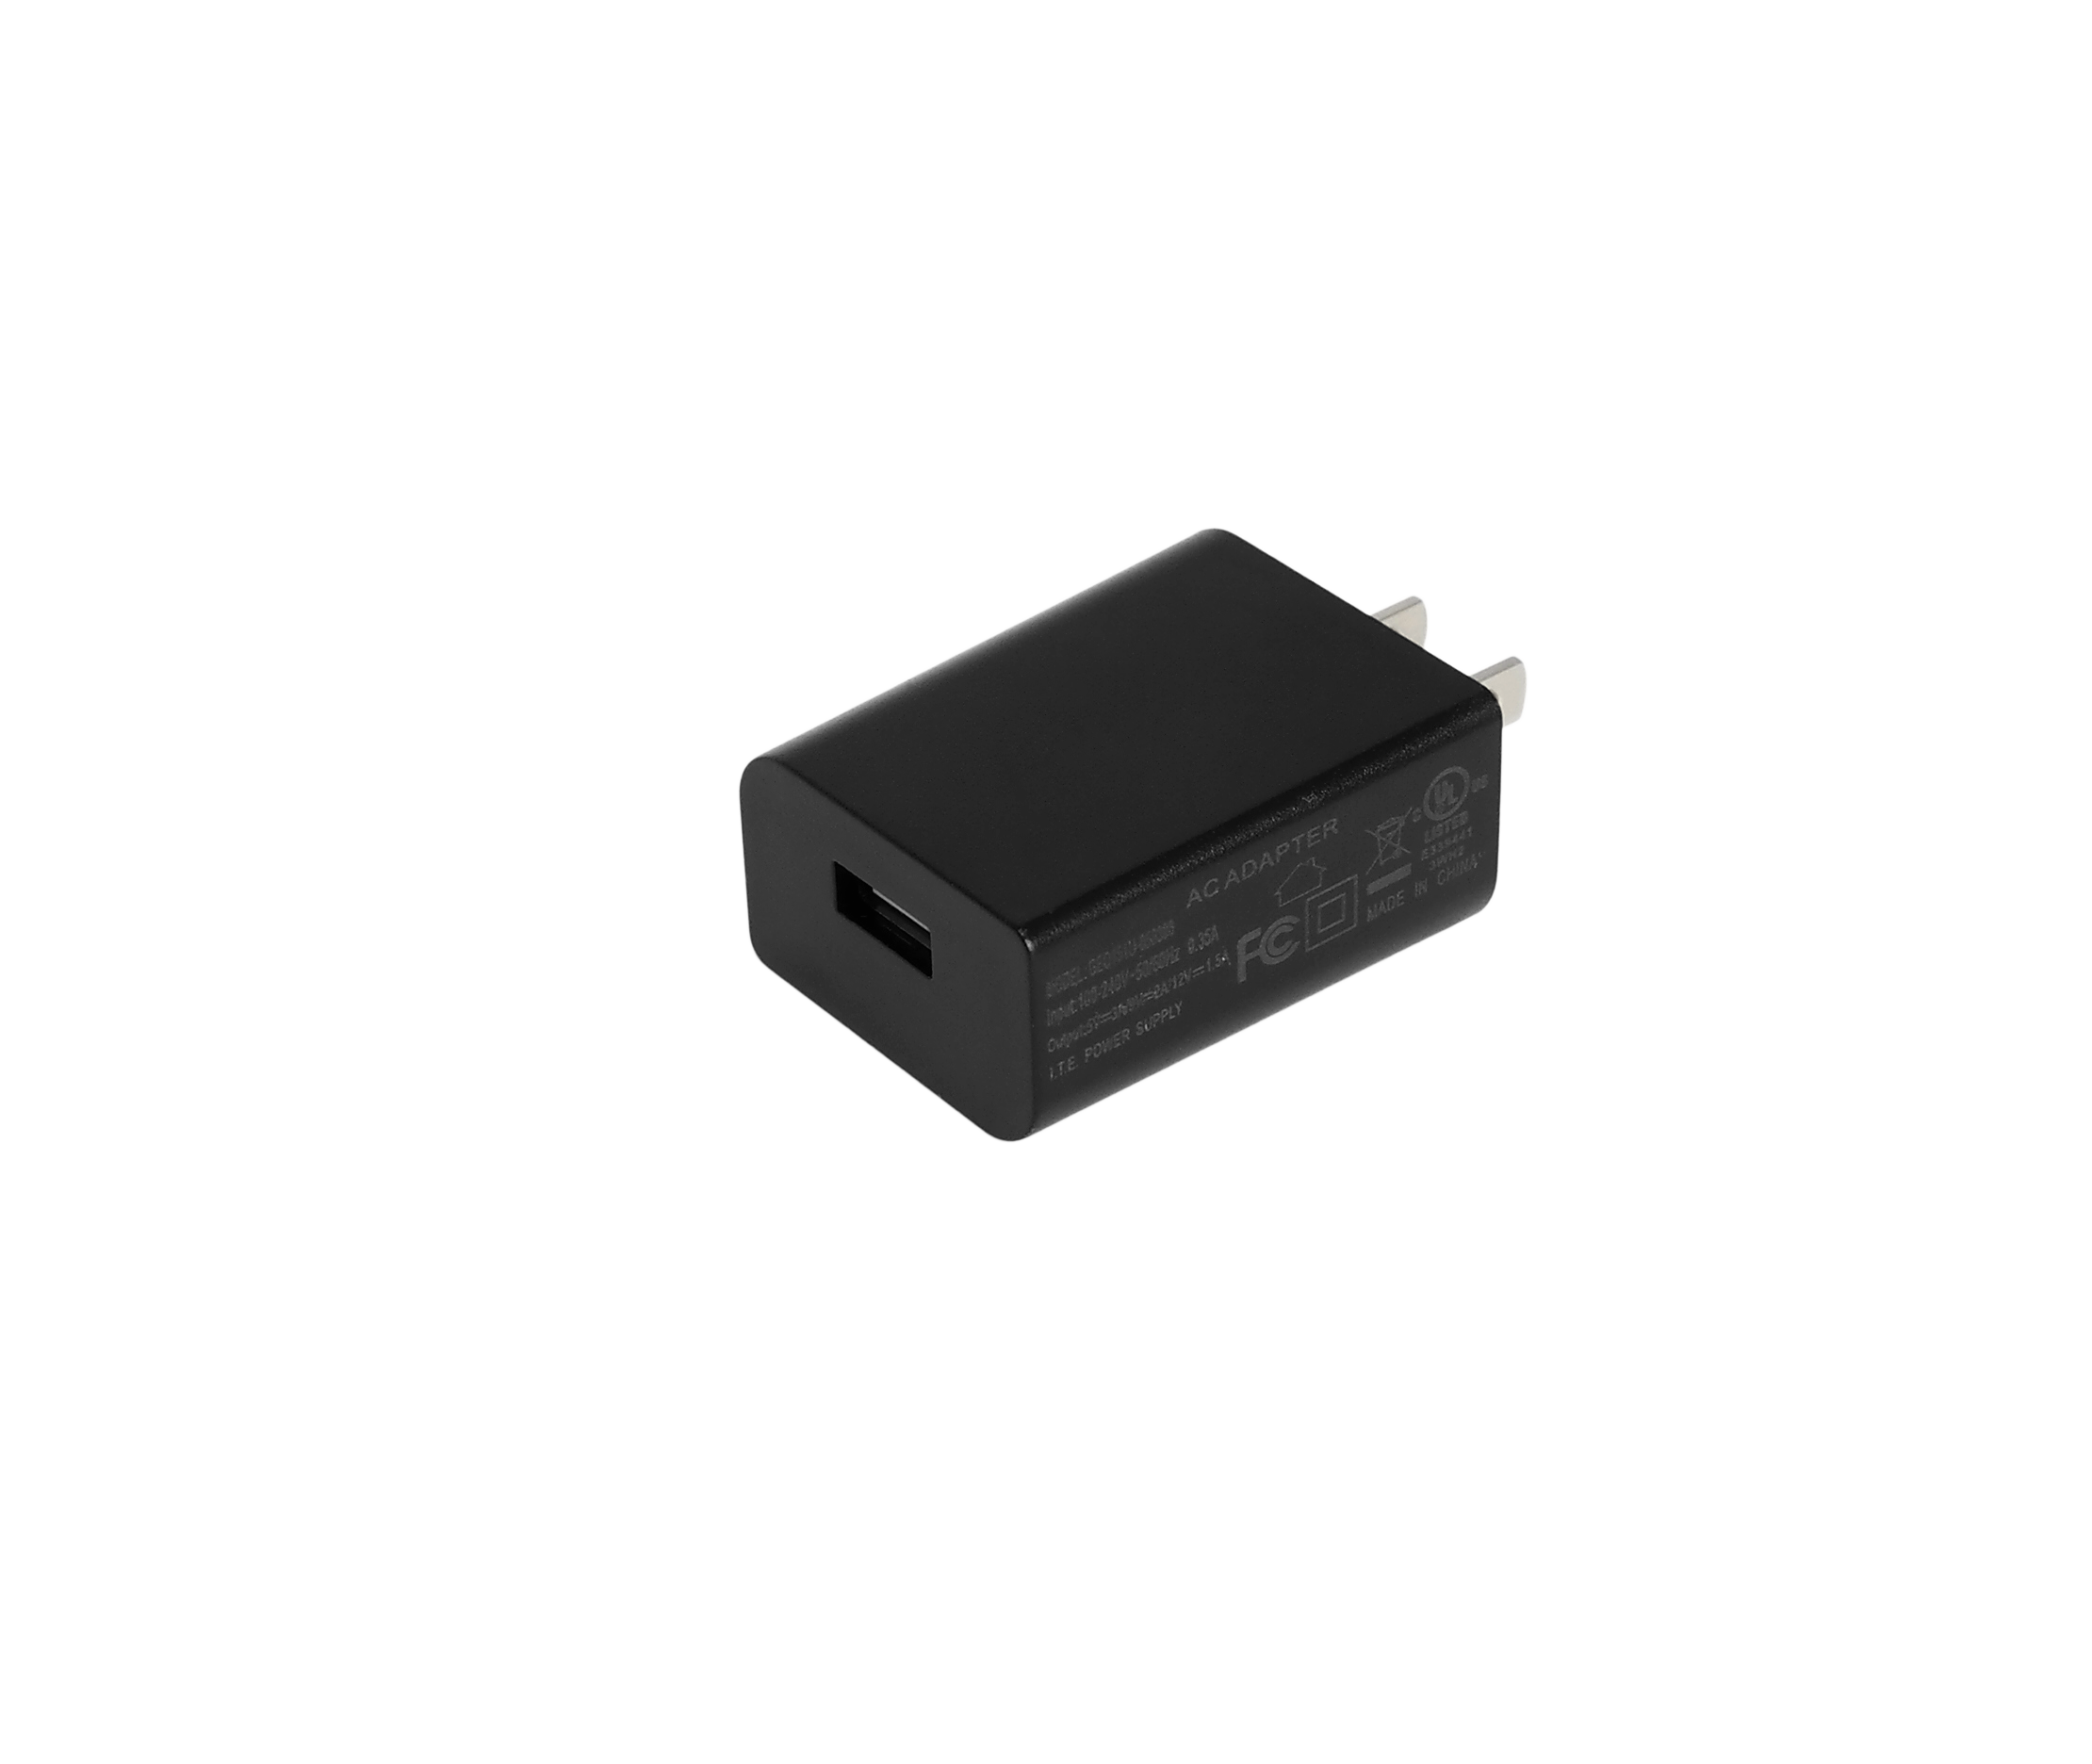 5V 2A USB Wall Charger